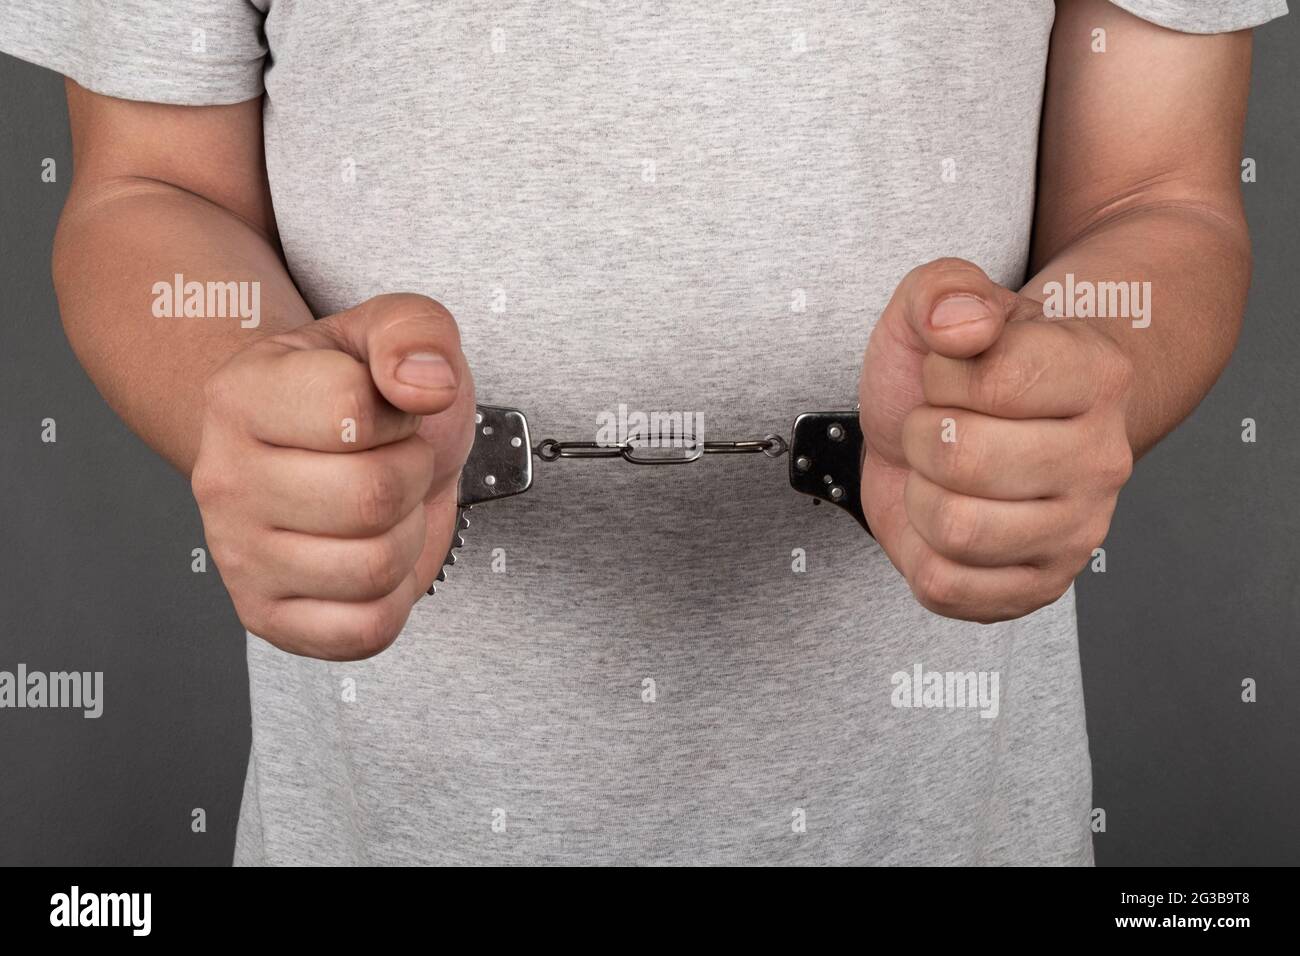 a man in handcuffs arrested was detained by law enforcement agencies. Stock Photo